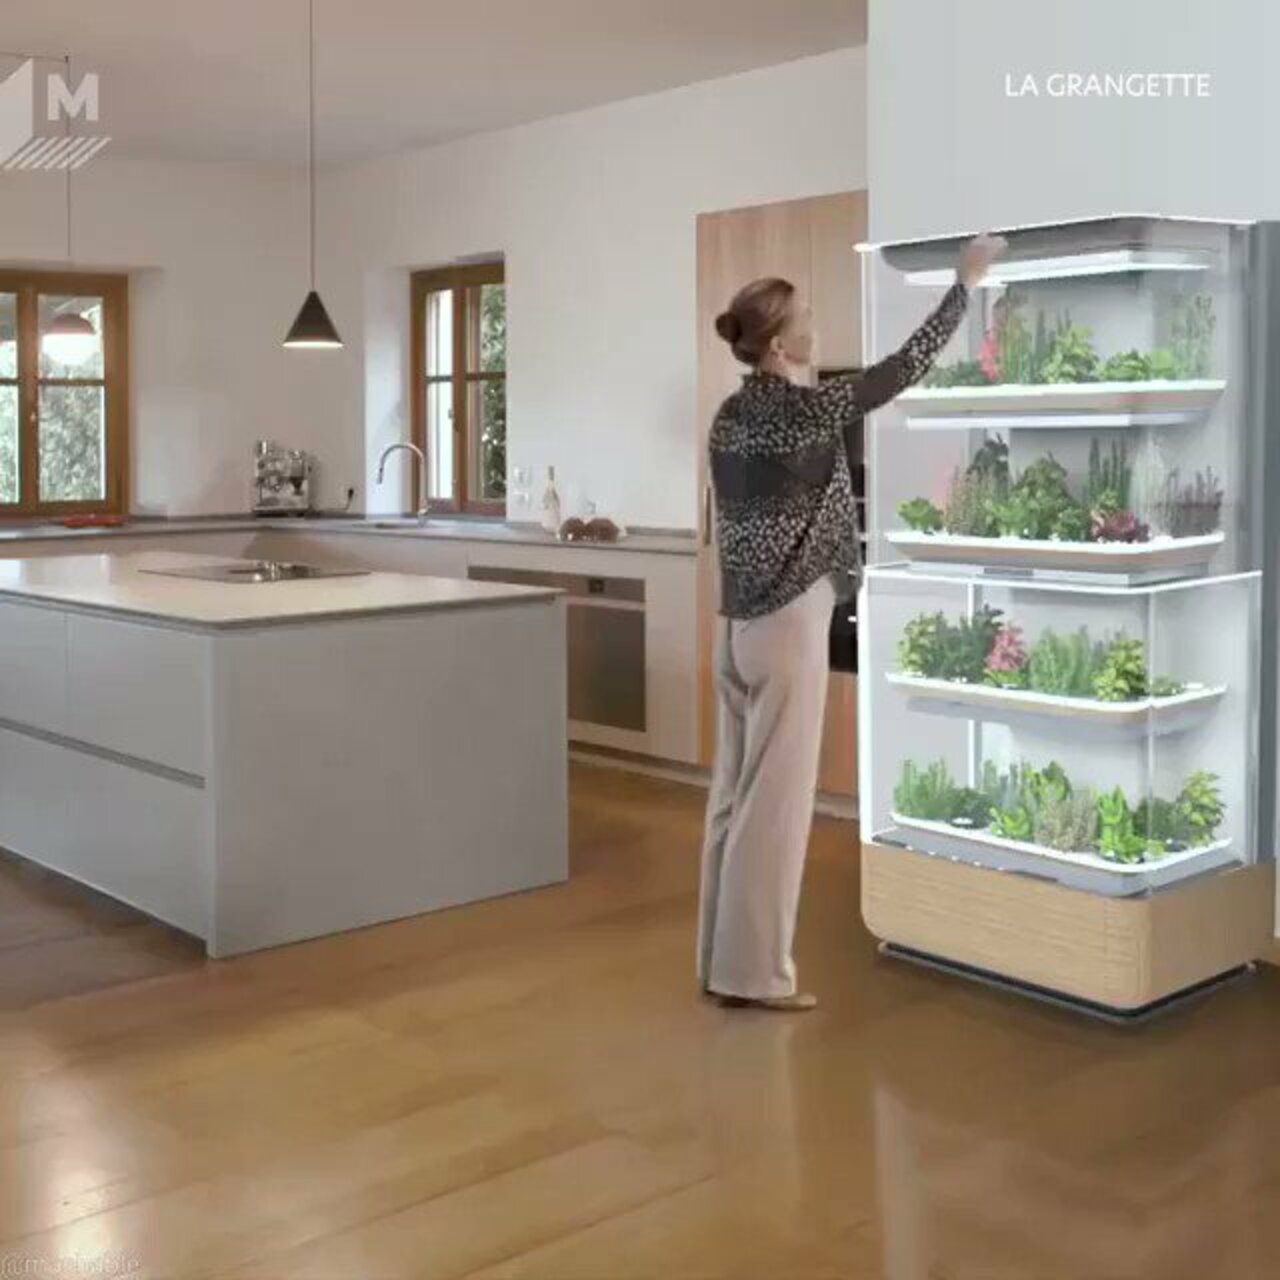 Your home garden is in for an upgrade by @mashable #AI #ArtificialIntelligence #Innovation #Tech #Technology Cc: @davidsmith4324 @maxjcm @ronald_vanloon @xbrlstandard @pascal_bornet https://t.co/J7CHhKhWGg